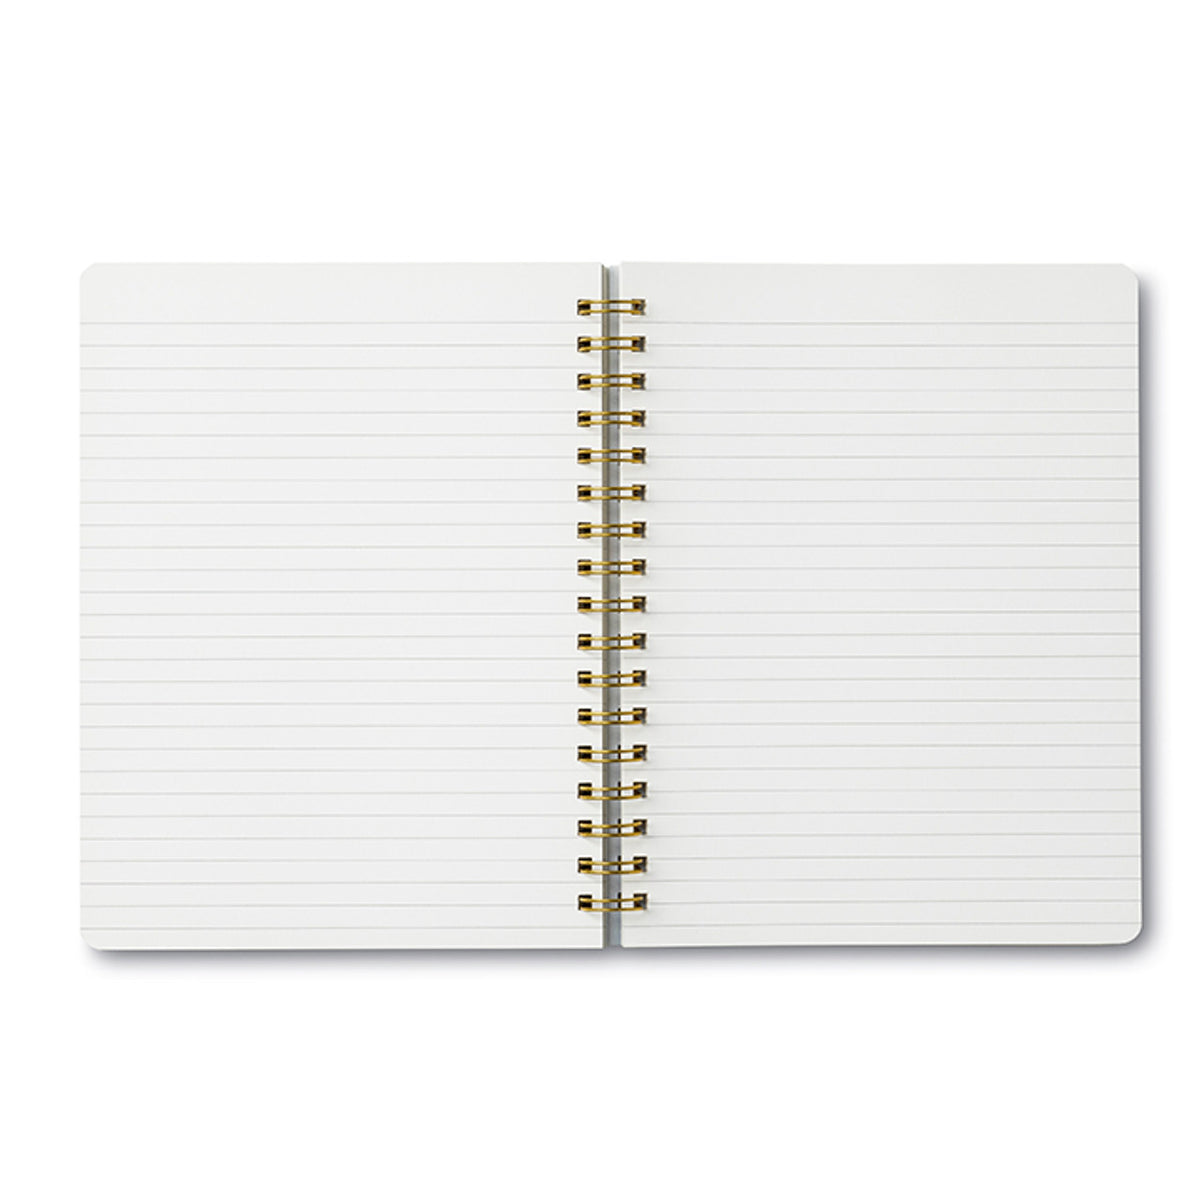 Lined notebook pages